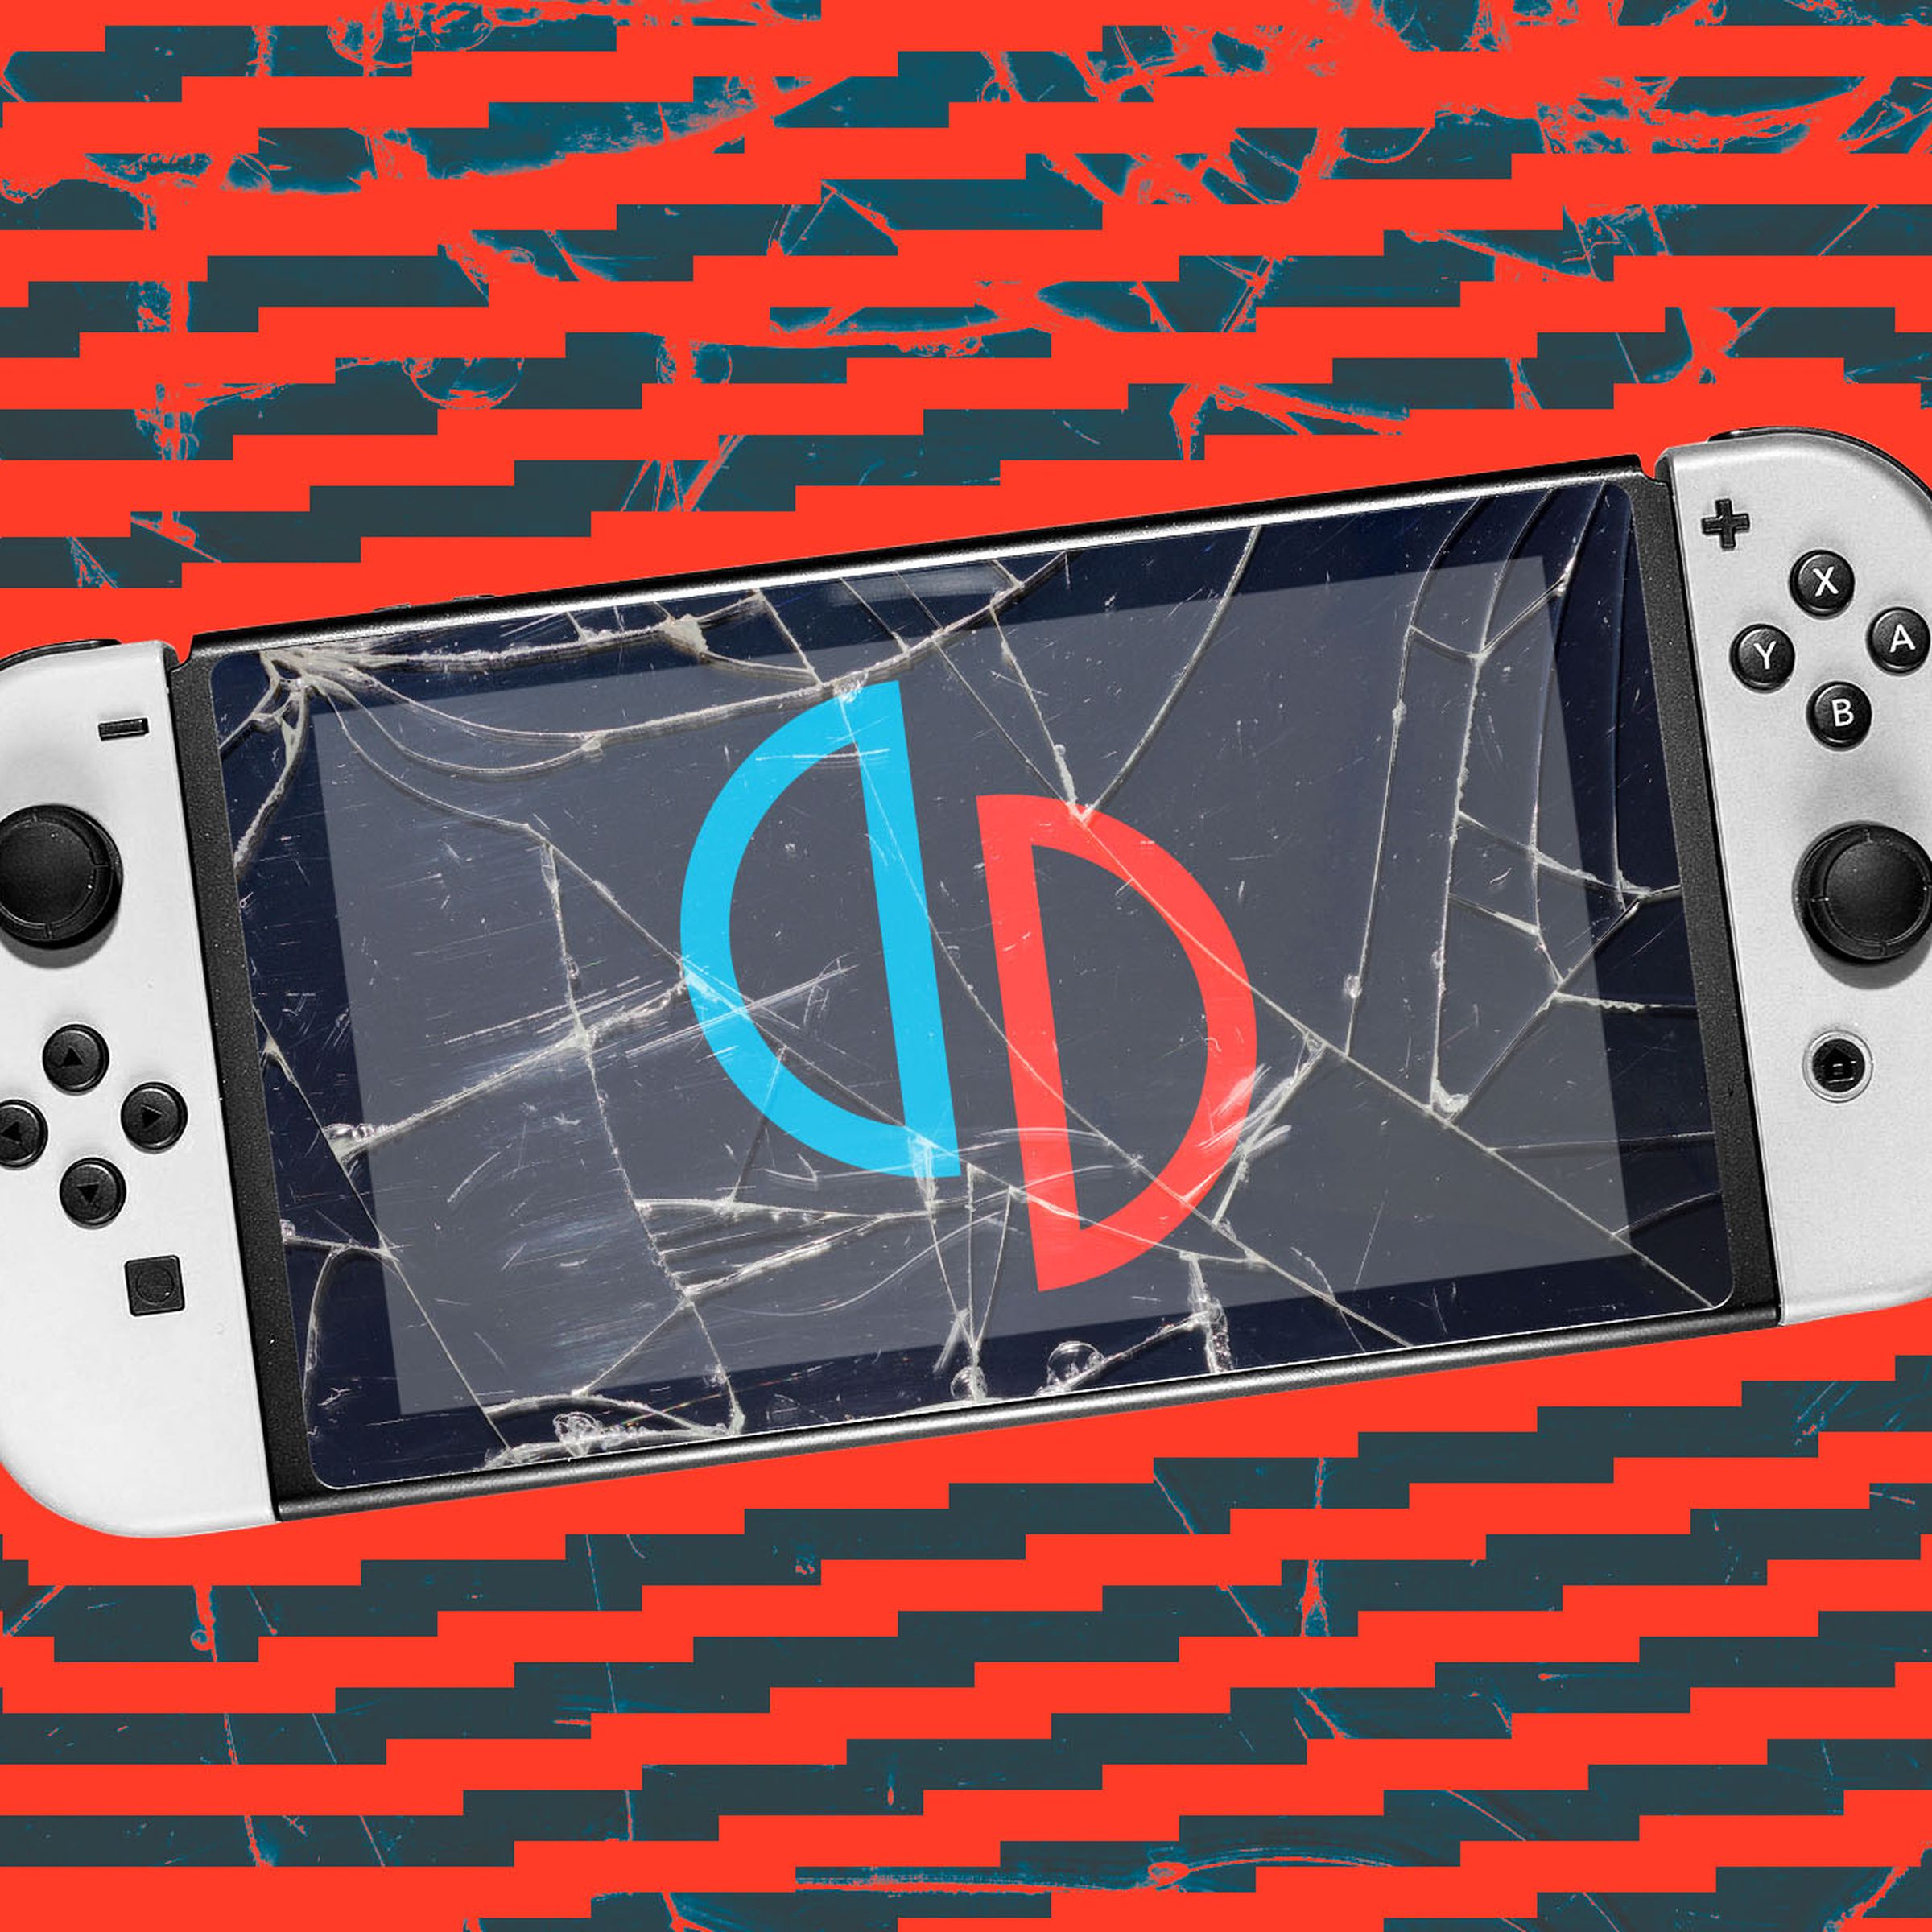 Photo illustration of a Nintendo Switch with a broken screen and the Yuzu logo.